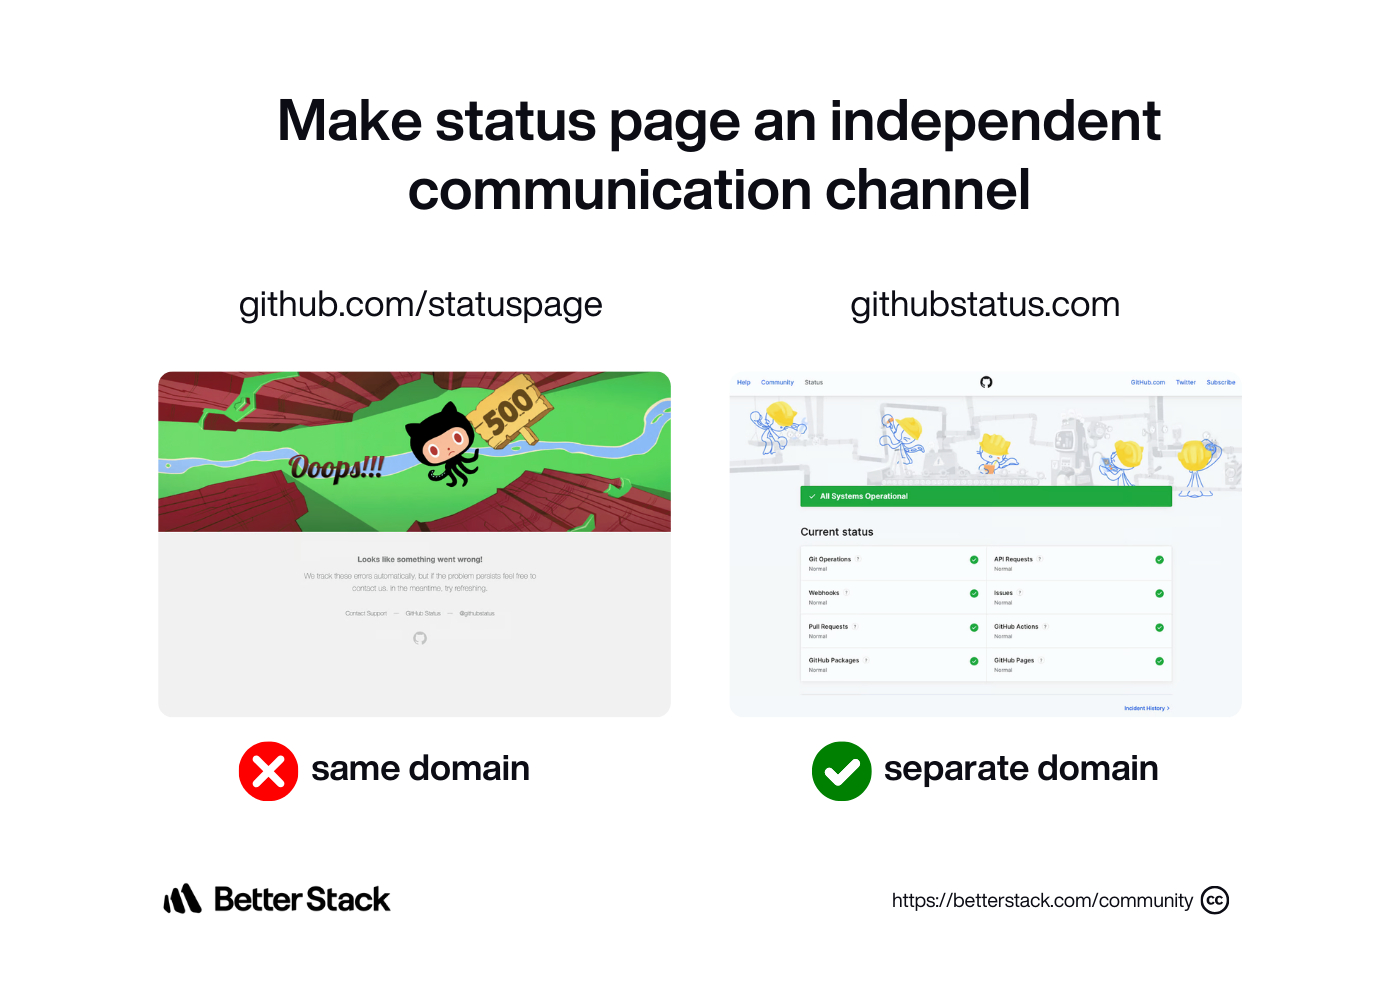 Shared - make status page an independent com. channel (3).png